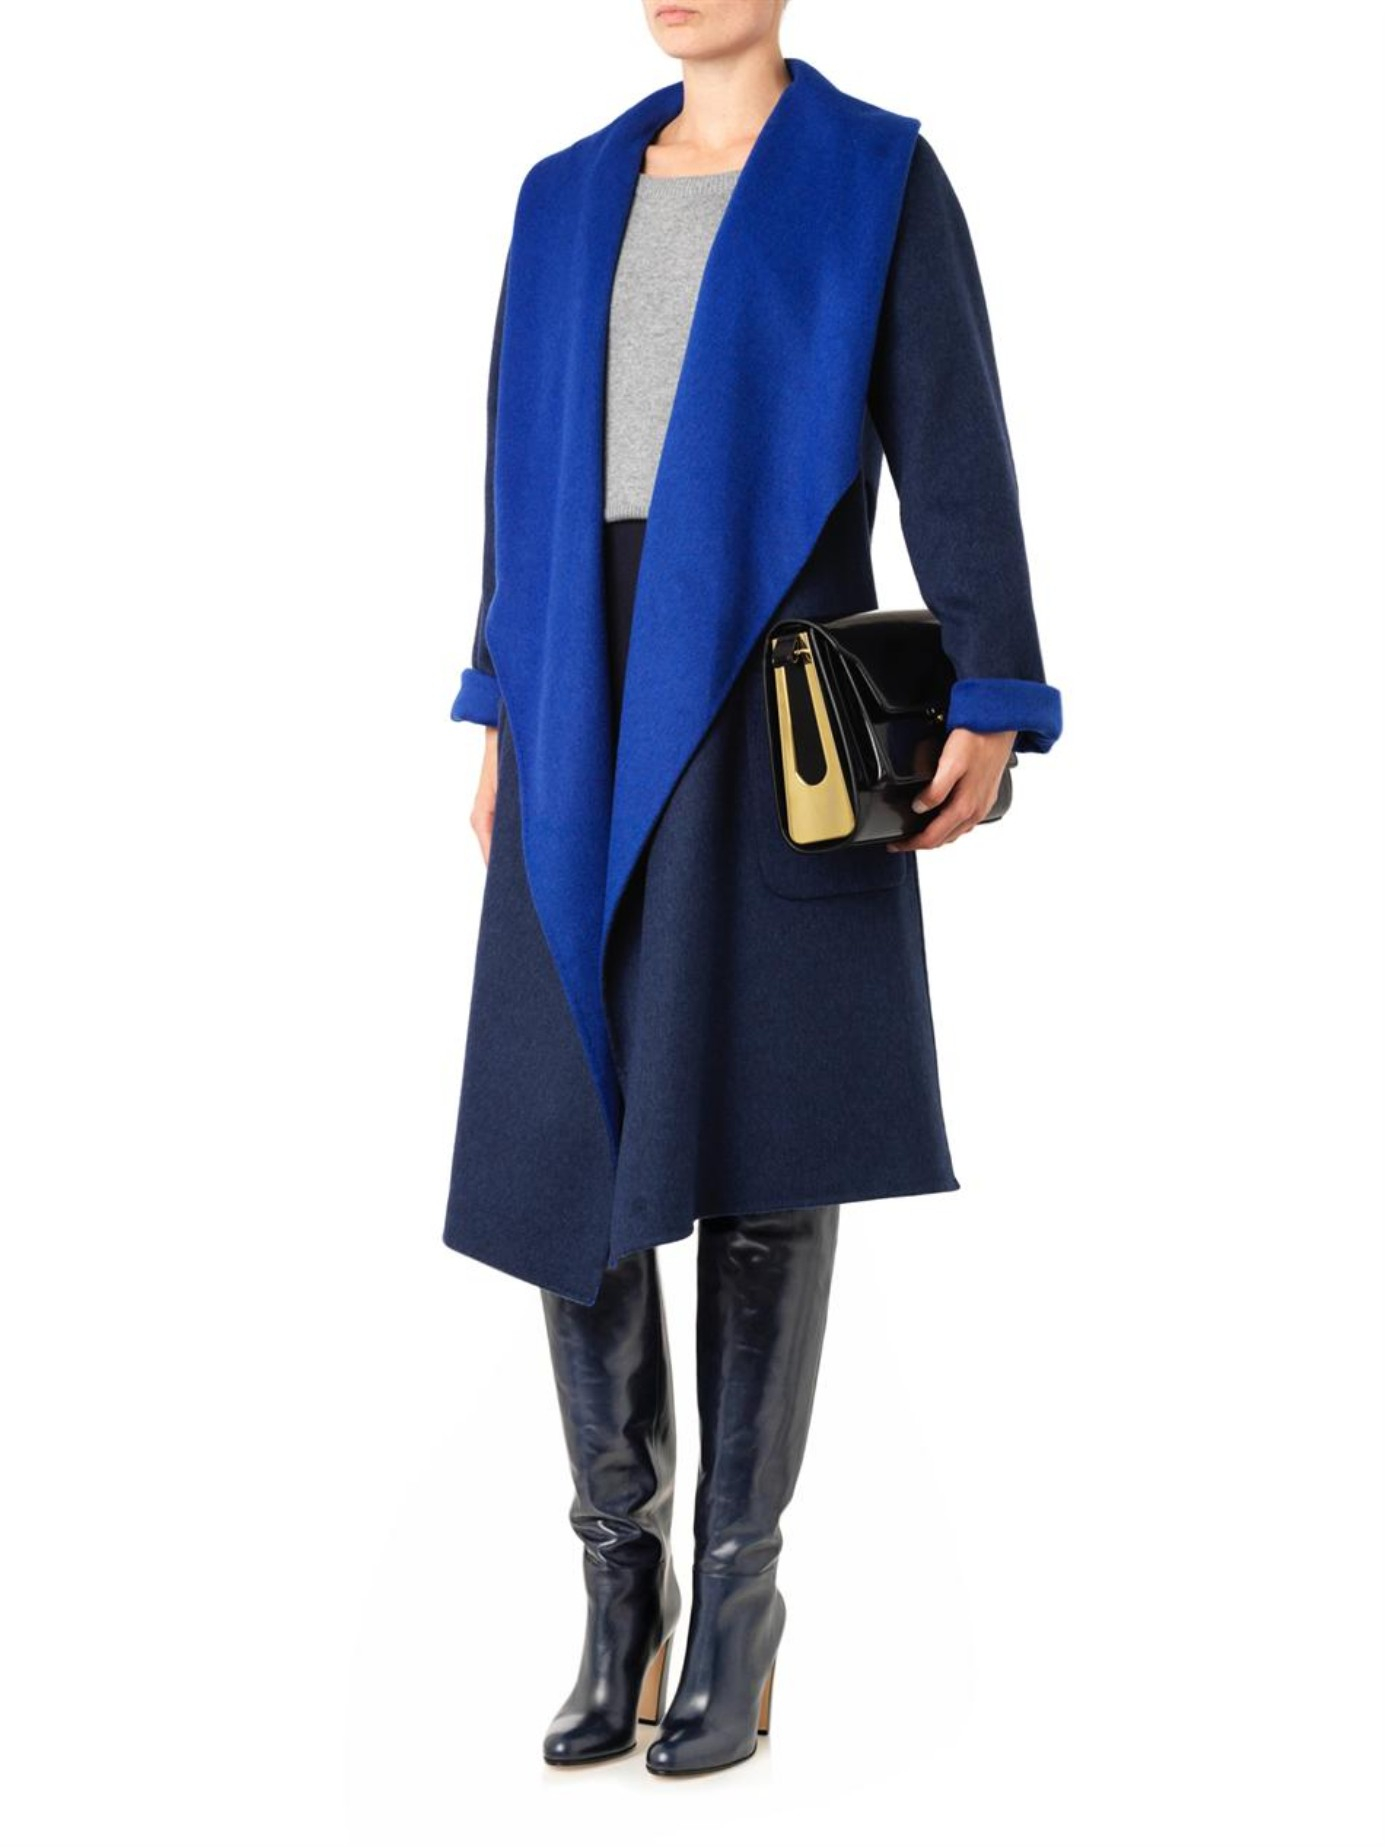 Gianvito Rossi Leather Over-The-Knee Boots in Navy (Blue) - Lyst